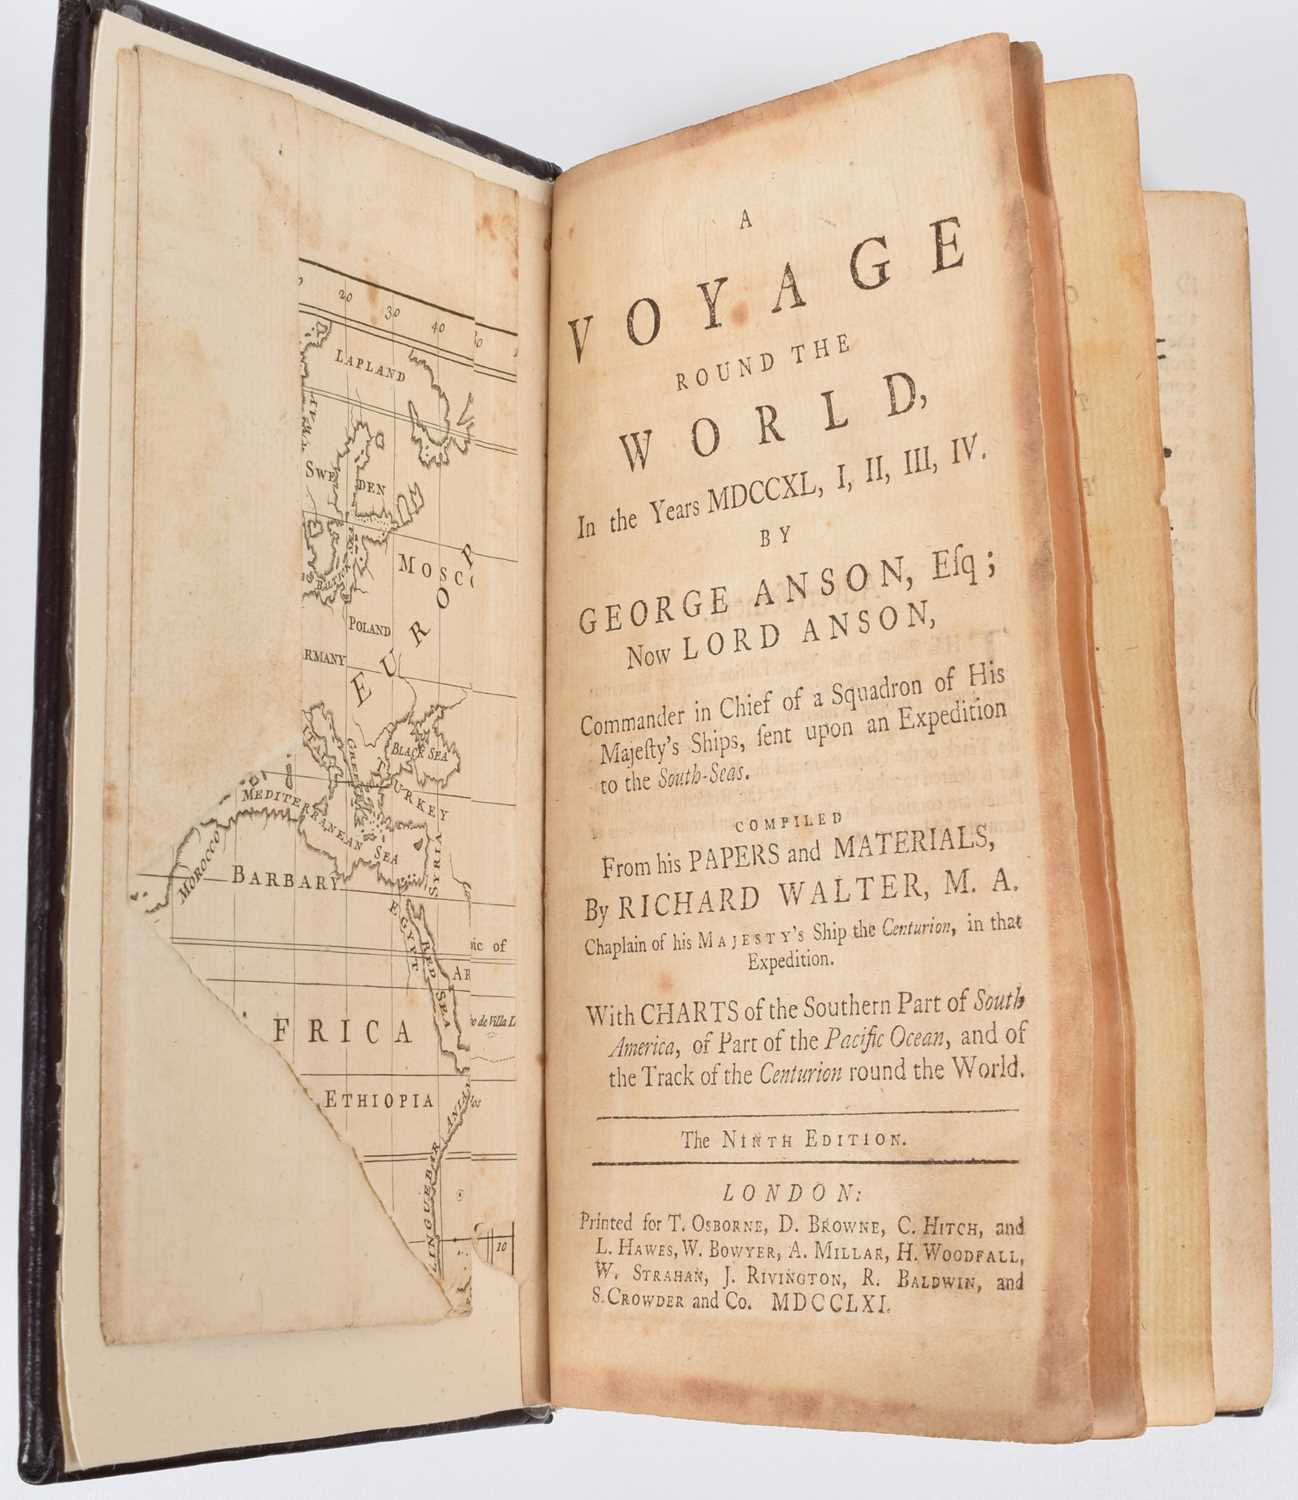 Lot 46 - Walter, R., A Voyage Round the World, by George Anson.